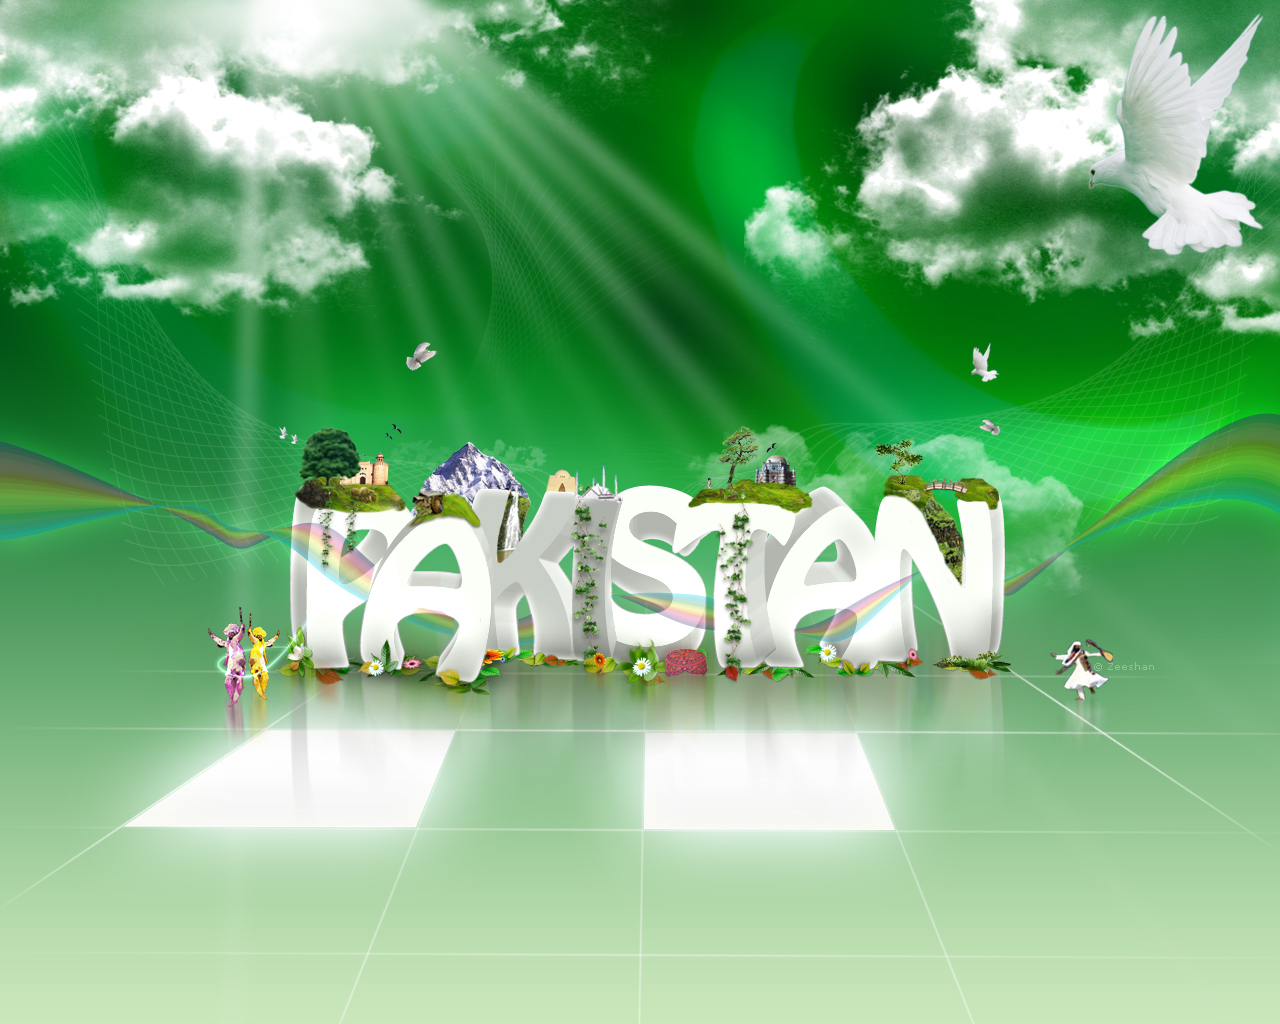 pakistan-the-land-of-love-wallpapers-14th-august-9to5-car-wallpapers